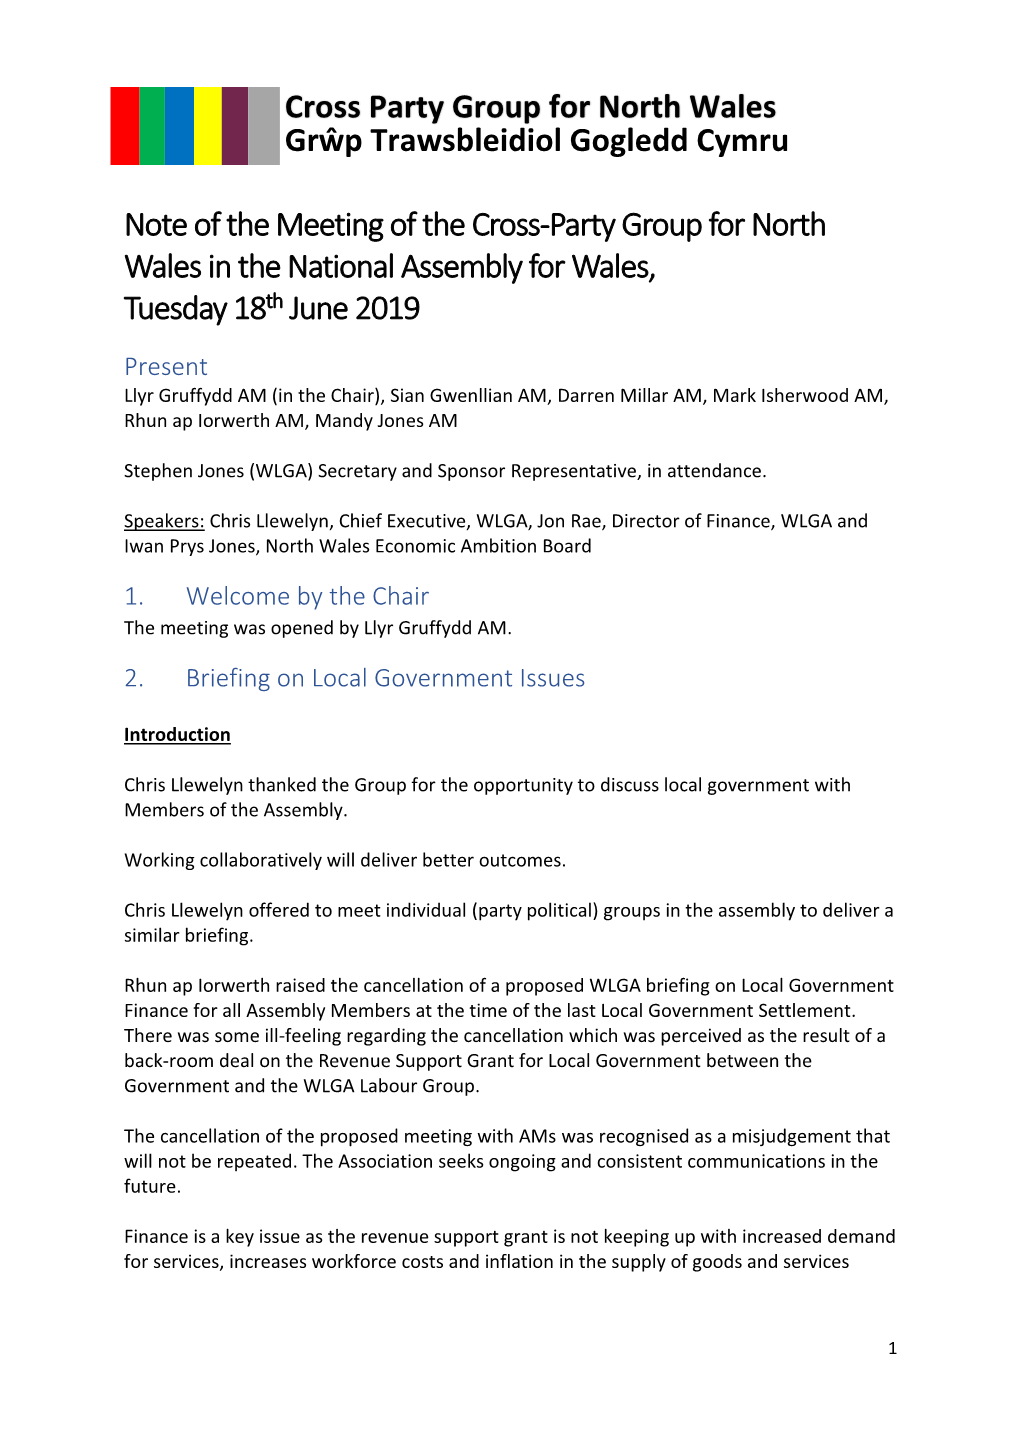 Note of the Meeting of the Cross-Party Group for North Wales in the National Assembly for Wales, Tuesday 18Th June 2019 Cross Pa